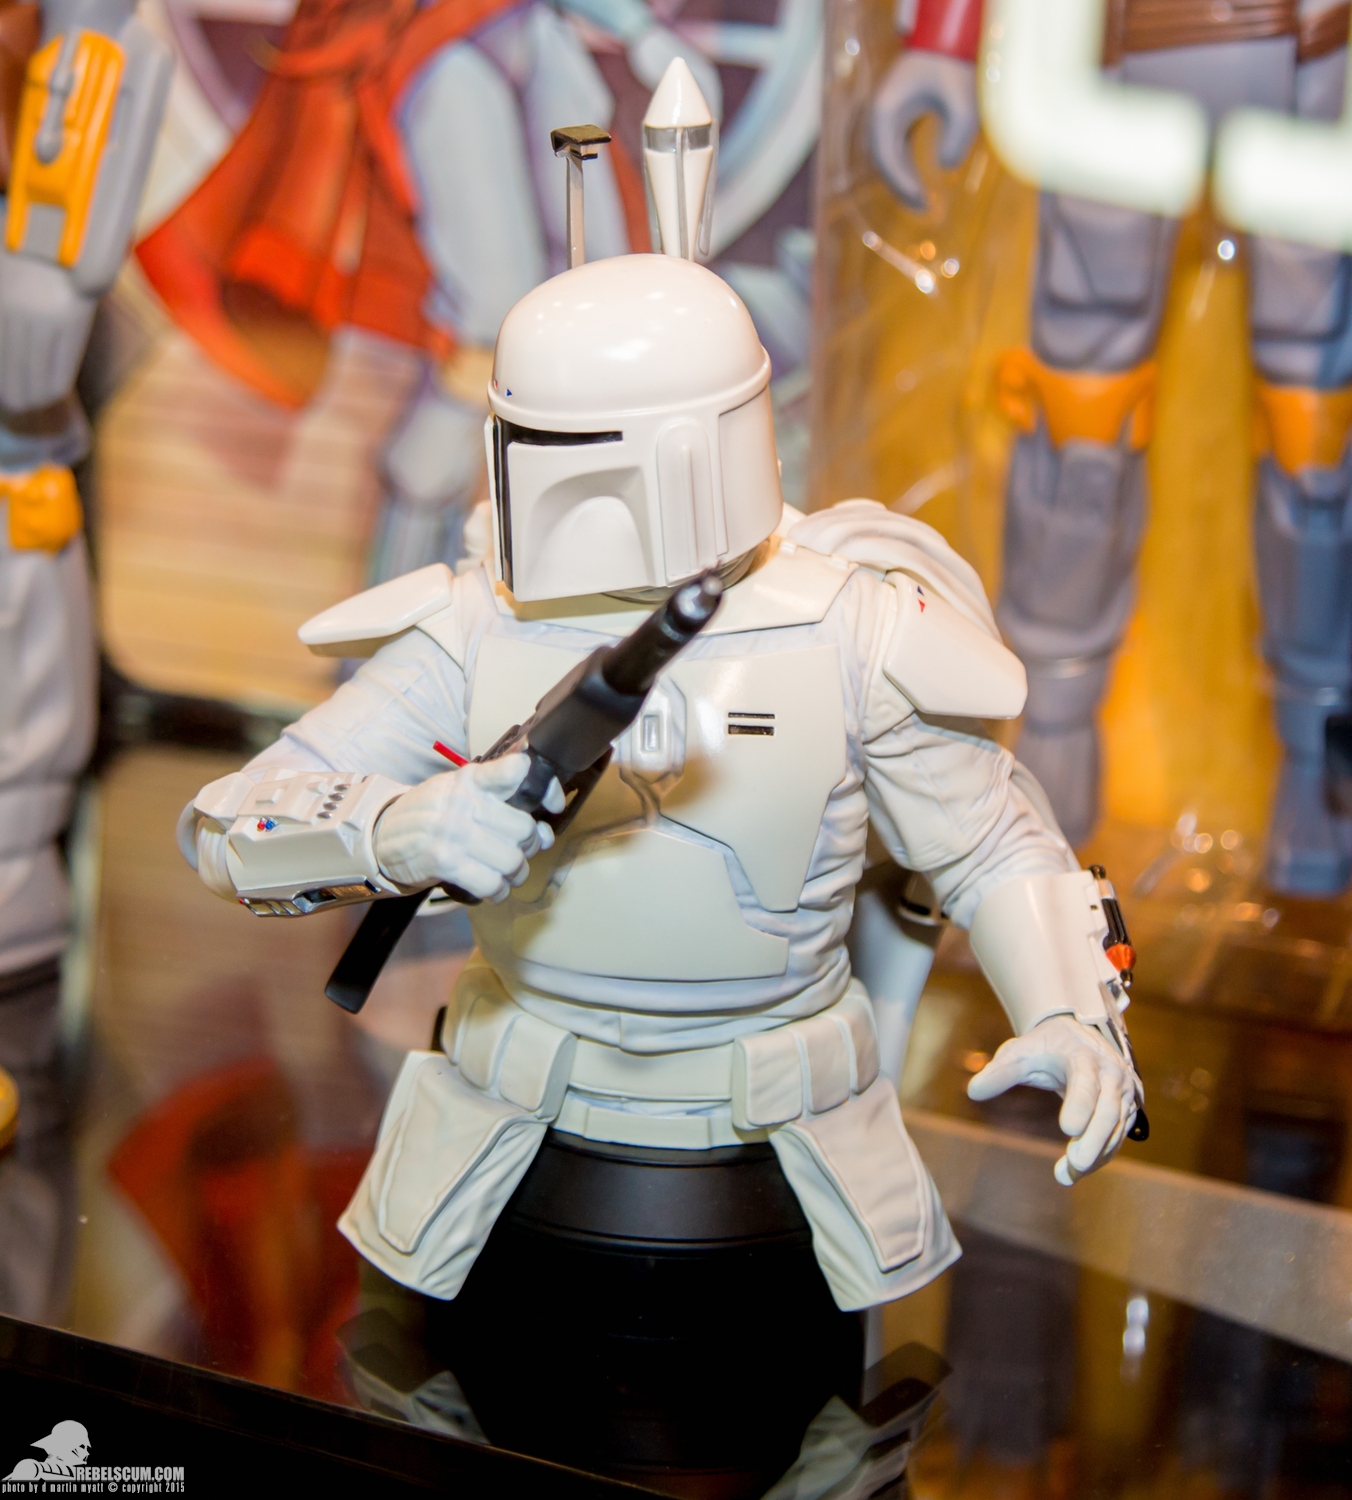 Gentle-Giant-Booth-2015-San-Diego-Comic-Con-SDCC-046.jpg